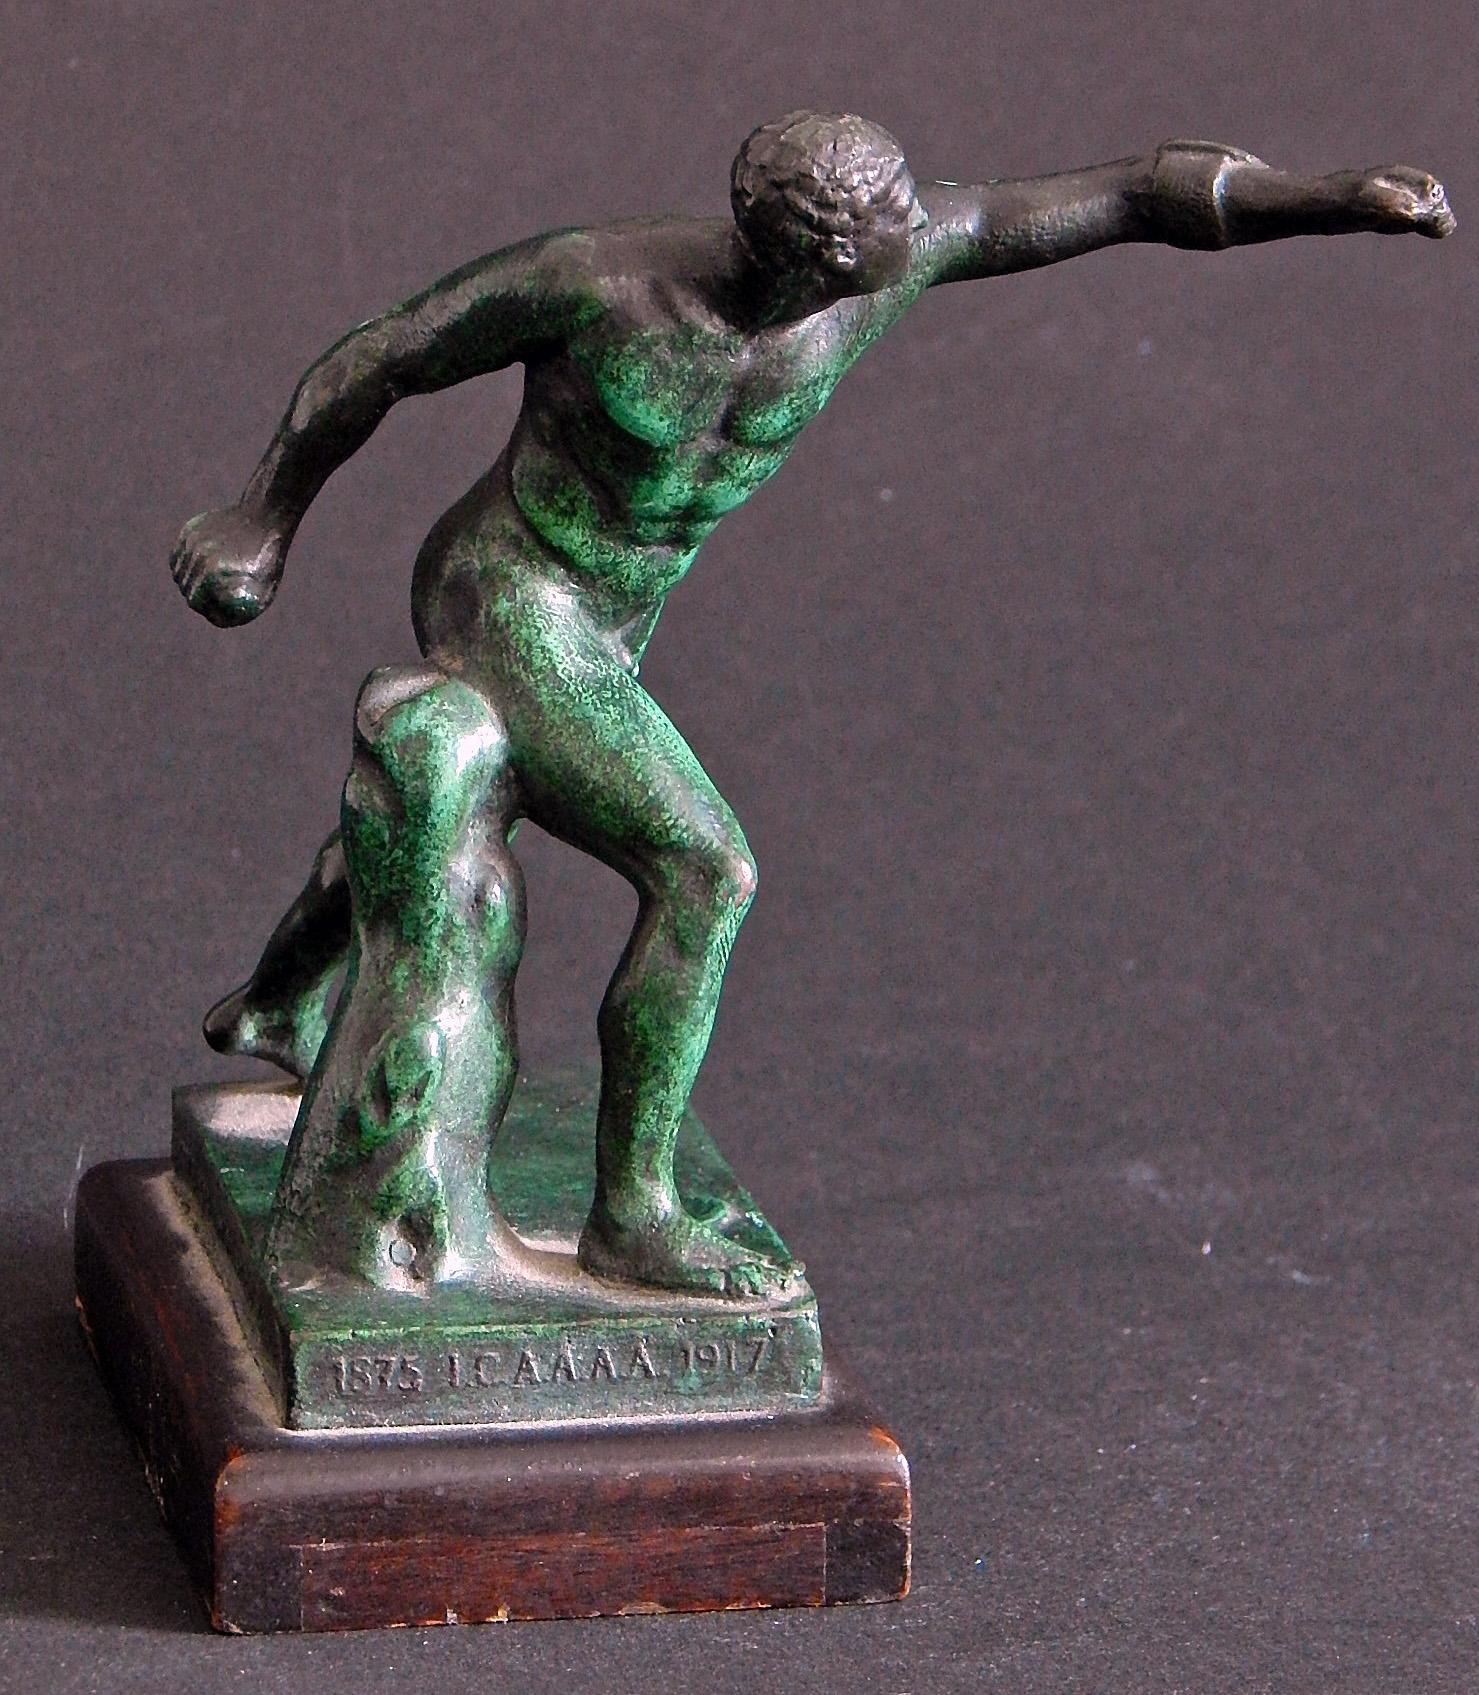 This extraordinarily rare -- perhaps unique -- bronze trophy was cast by America's premier art bronze foundry, the Roman Bronze Works in New York City, for the Intercollegiate Association of Amateur Athletes of America, later known as the IC4A, in